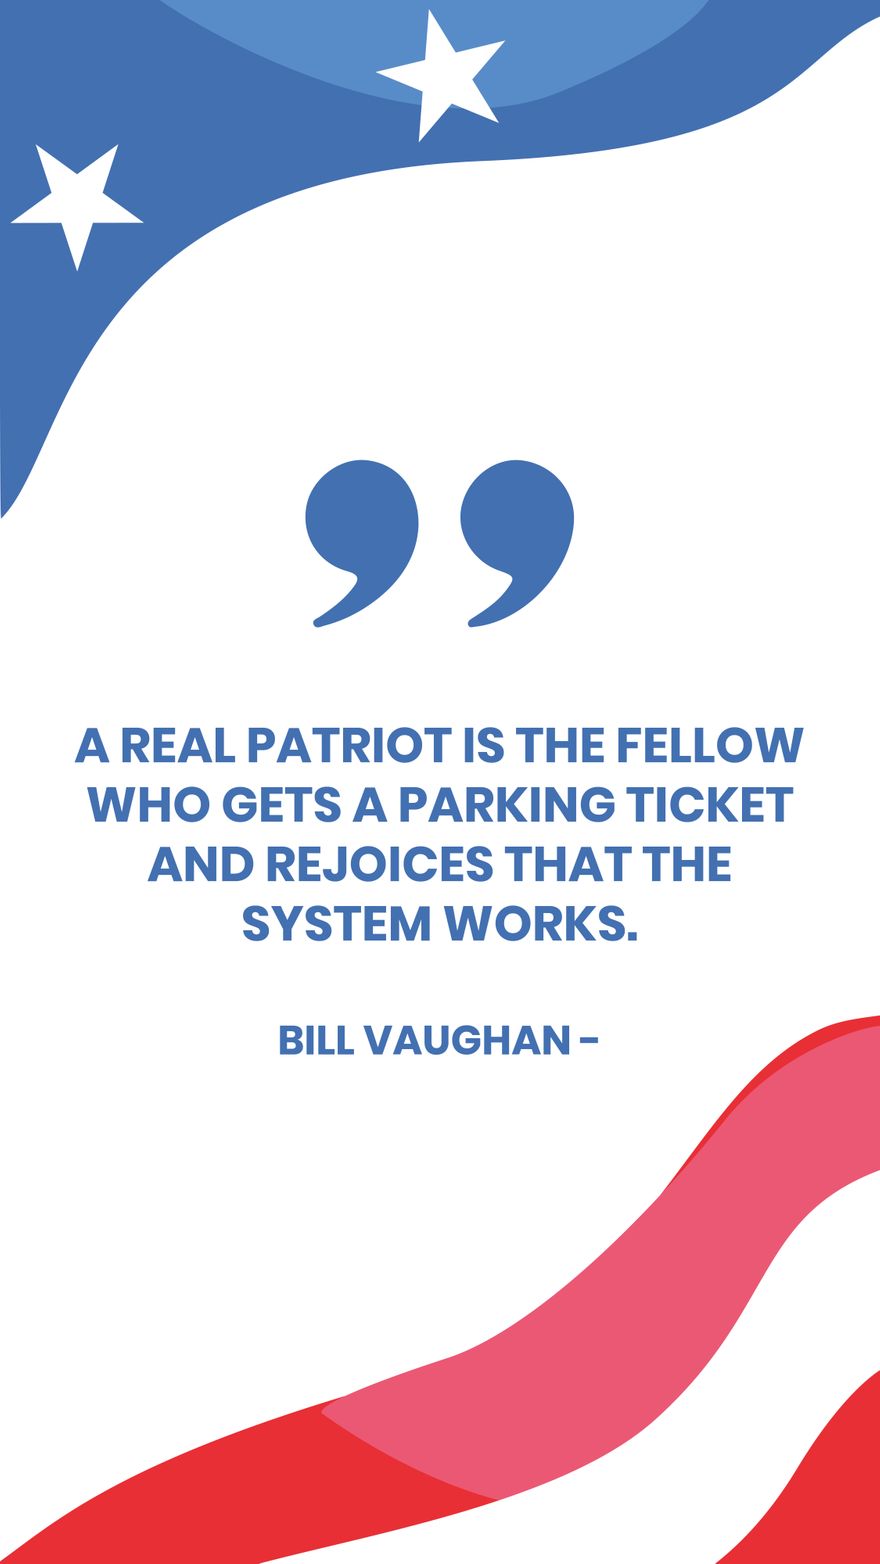 Free Bill Vaughan - A real patriot is the fellow who gets a parking ticket and rejoices that the system works.